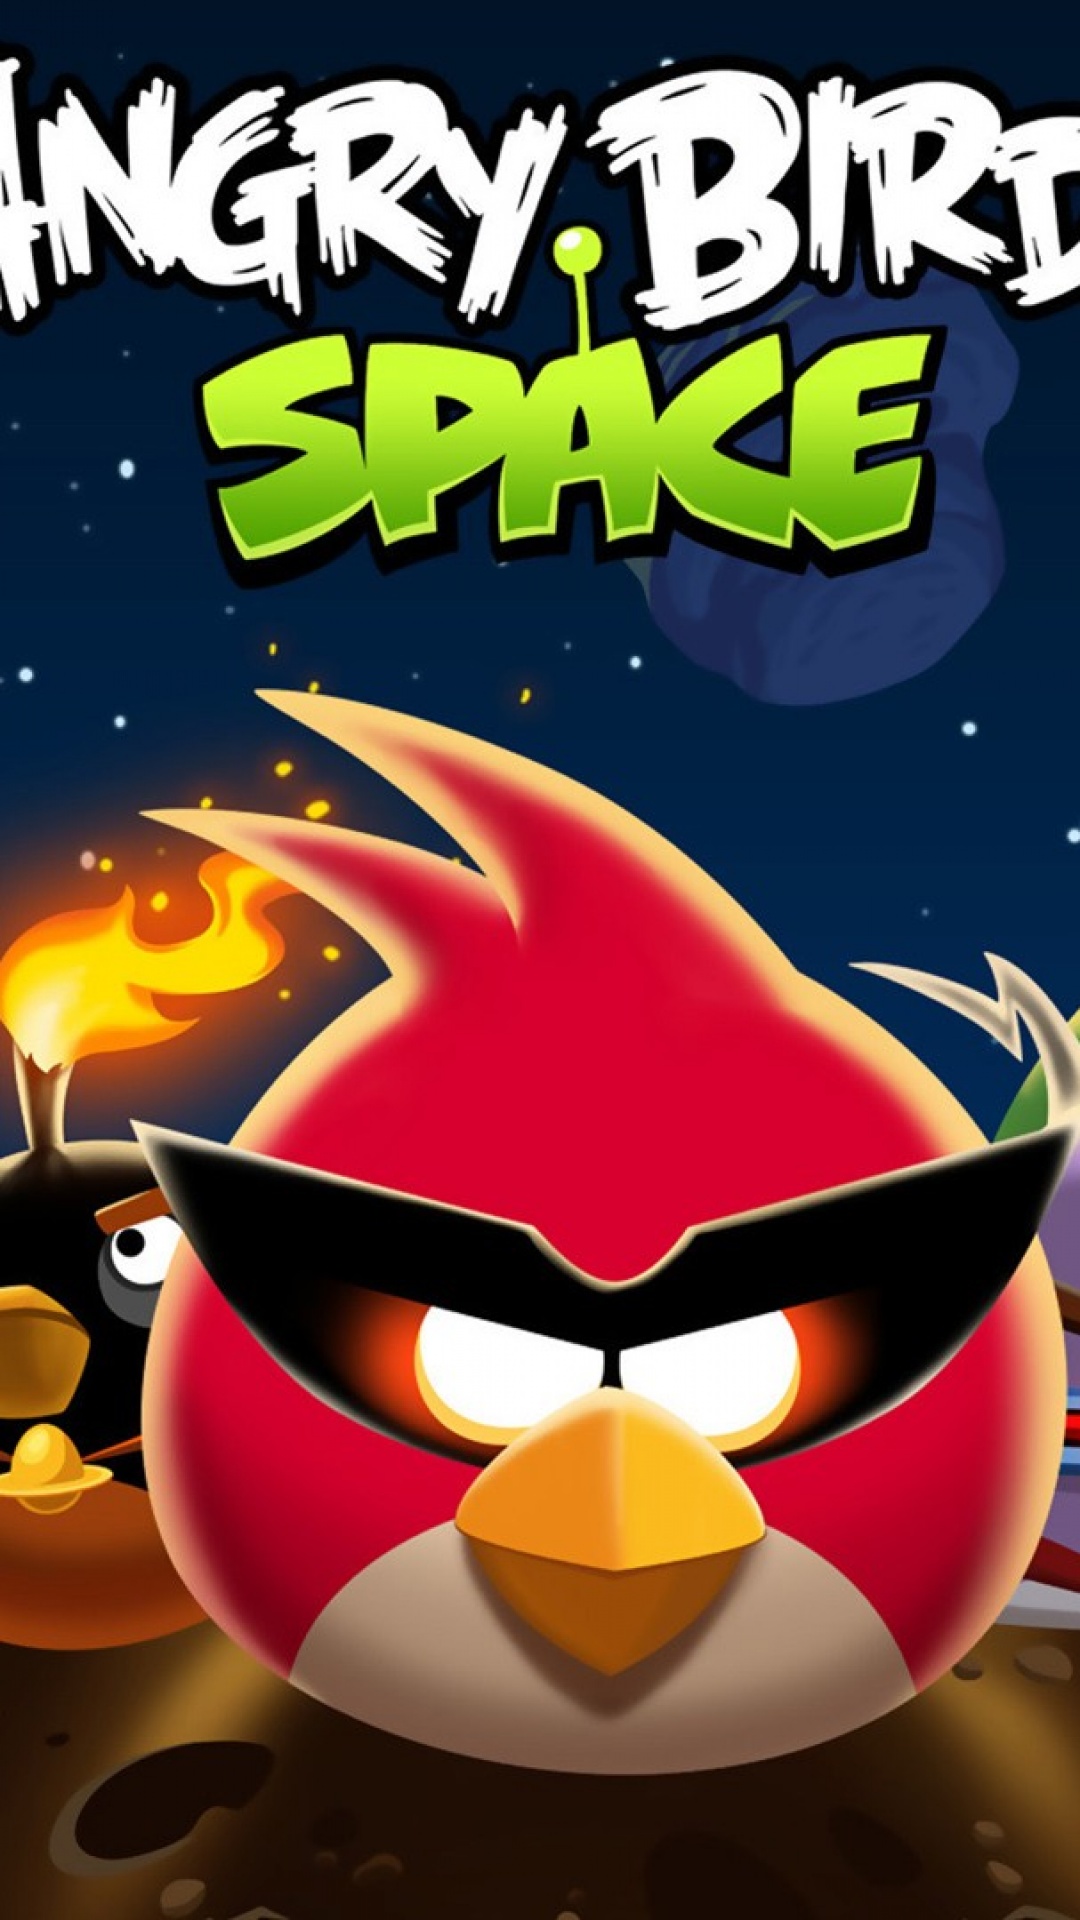 Angry birds space steam фото 52